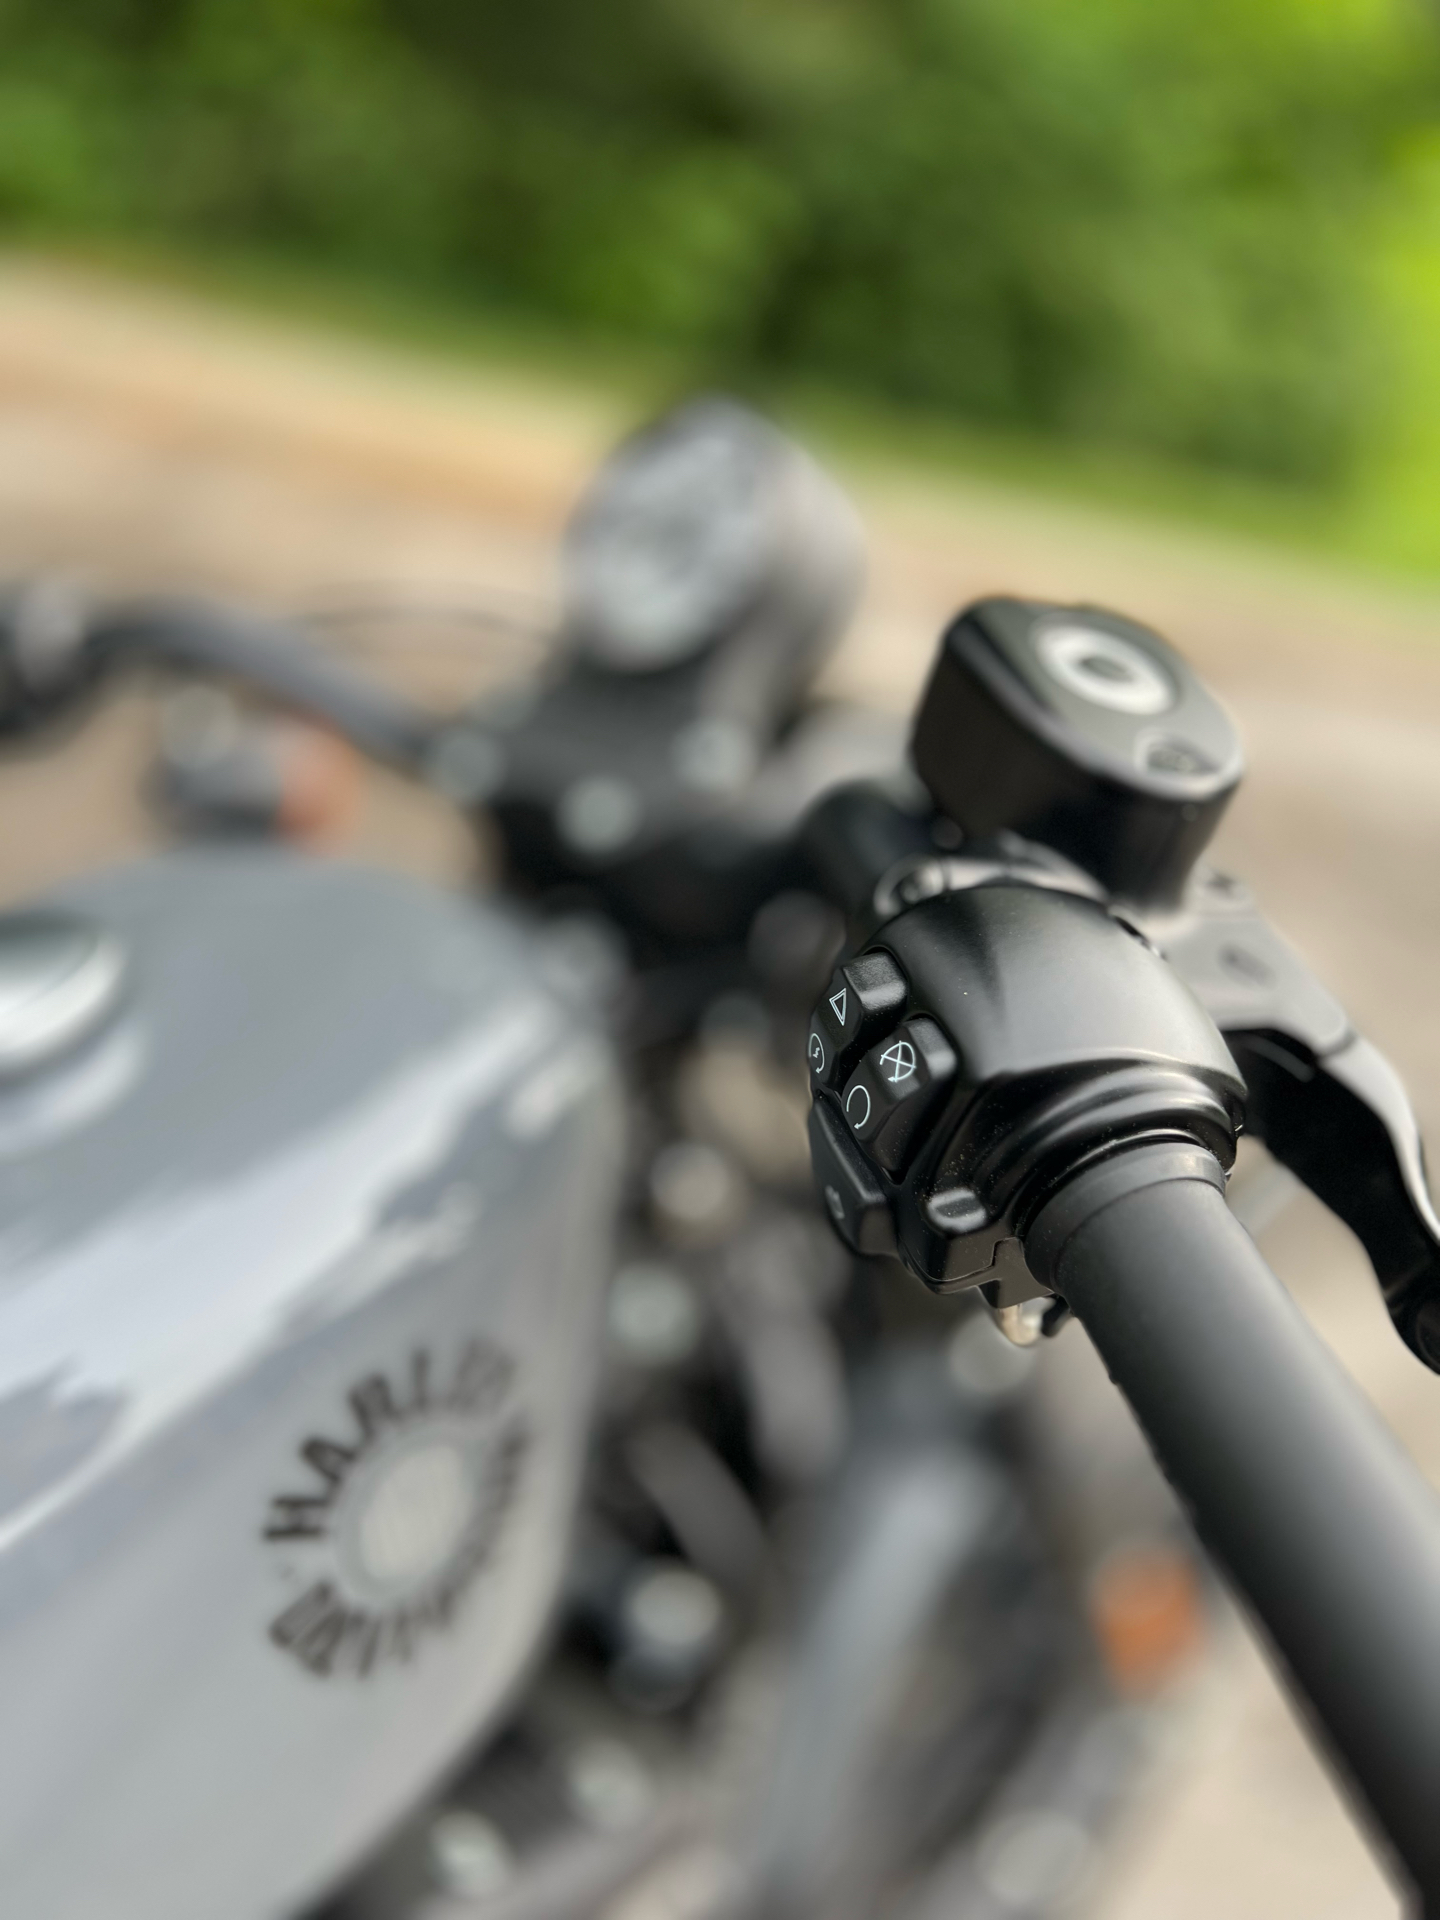 2022 Harley-Davidson Iron 883™ in Franklin, Tennessee - Photo 15